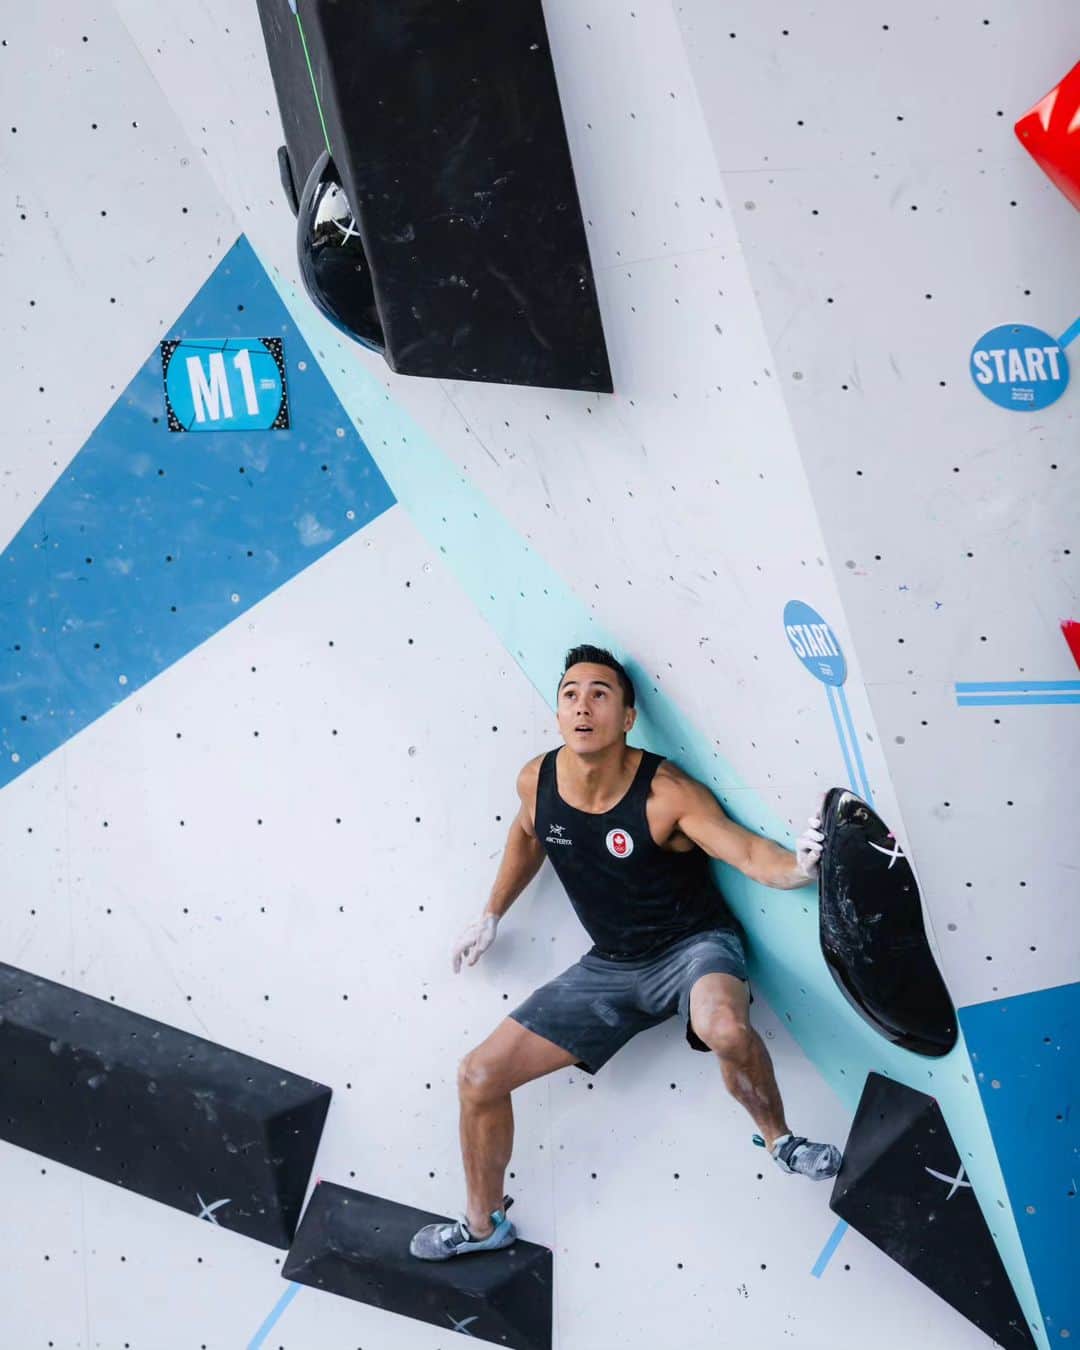 シーン・マコールのインスタグラム：「Being part of these Major Games as a part of @teamCanada and @climbCanada has been an absolute thrill and privilege. I am so blessed to be surrounded by like-minded high performance athletes striving to achieve their best performances. Not only in climbing, but talking to the other athletes, staff, coaches, medical, and everyone else I met these Games have been such good experiences. ⠀⠀⠀⠀⠀⠀⠀⠀⠀ My favourite part, besides climbing of course was sitting in our Team Canada house watching the other sports with a steady flow of athletes from those other sports filtering through. I learned "everything" about Taekwondo, Diving, Gymnastics, Cycling, and a smattering of other sports. It's amazing meeting these elite athletes and talking shop 🔧! I alsp did my fair share of climbing teaching which I love, and I'm happy the other athletes are also interested in the sport I fell in love with. ❤️  ⠀⠀⠀⠀⠀⠀⠀⠀⠀ The finals were hard in more ways than one. My fall from the top of M4 put forth a series of events that I can only describe as the biggest challenge of my climbing career. My eyes swell with tears just thinking and writing about it. In short, I cracked a rib on landing, and then did everything I could to make it to the finish line. There was fear, tears, pain, doubt, tape and ice but perseverance and stubbornness eventually prevailed. I did climb my route, in whatever capacity I could. It wasn't perfect with the ever increasing pain but it wasn't bad either. I'm proud of what I did, and I will still leave these Games with a sense of accomplishment. ⠀⠀⠀⠀⠀⠀⠀⠀⠀ More to come in the following days. Thank you to my teammates, coaches, medical staff, support staff, and COC staff. You all made this trip incredible in multiple ways. ⠀⠀⠀⠀⠀⠀⠀⠀⠀ 📸 by @lenadrapella #santiago2023 #climbing #teamcanada」